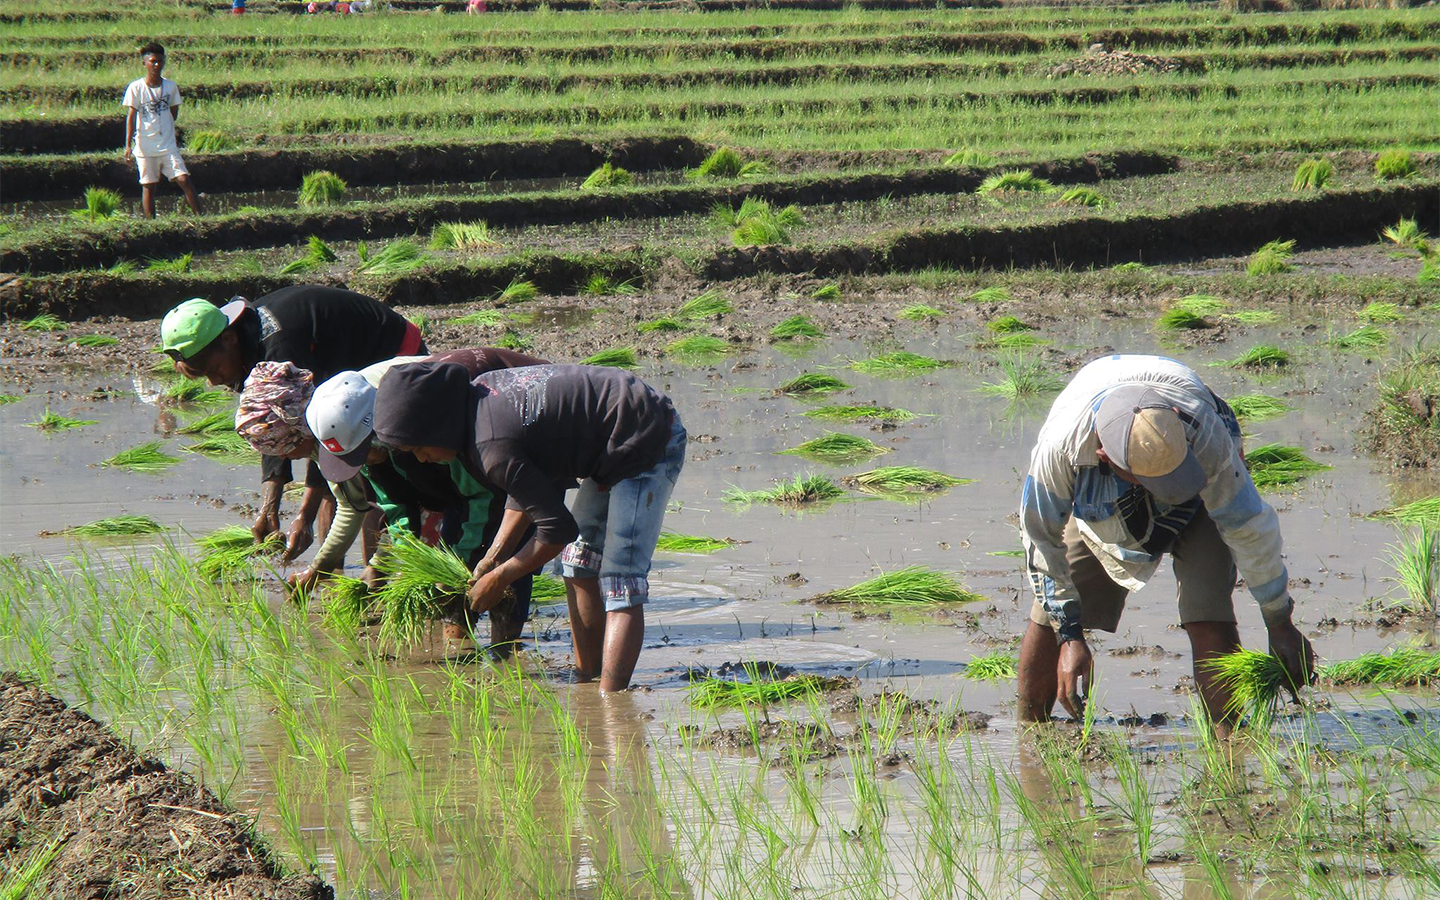 In a major boost for Timor-Leste’s food security, rice harvests have more than doubled